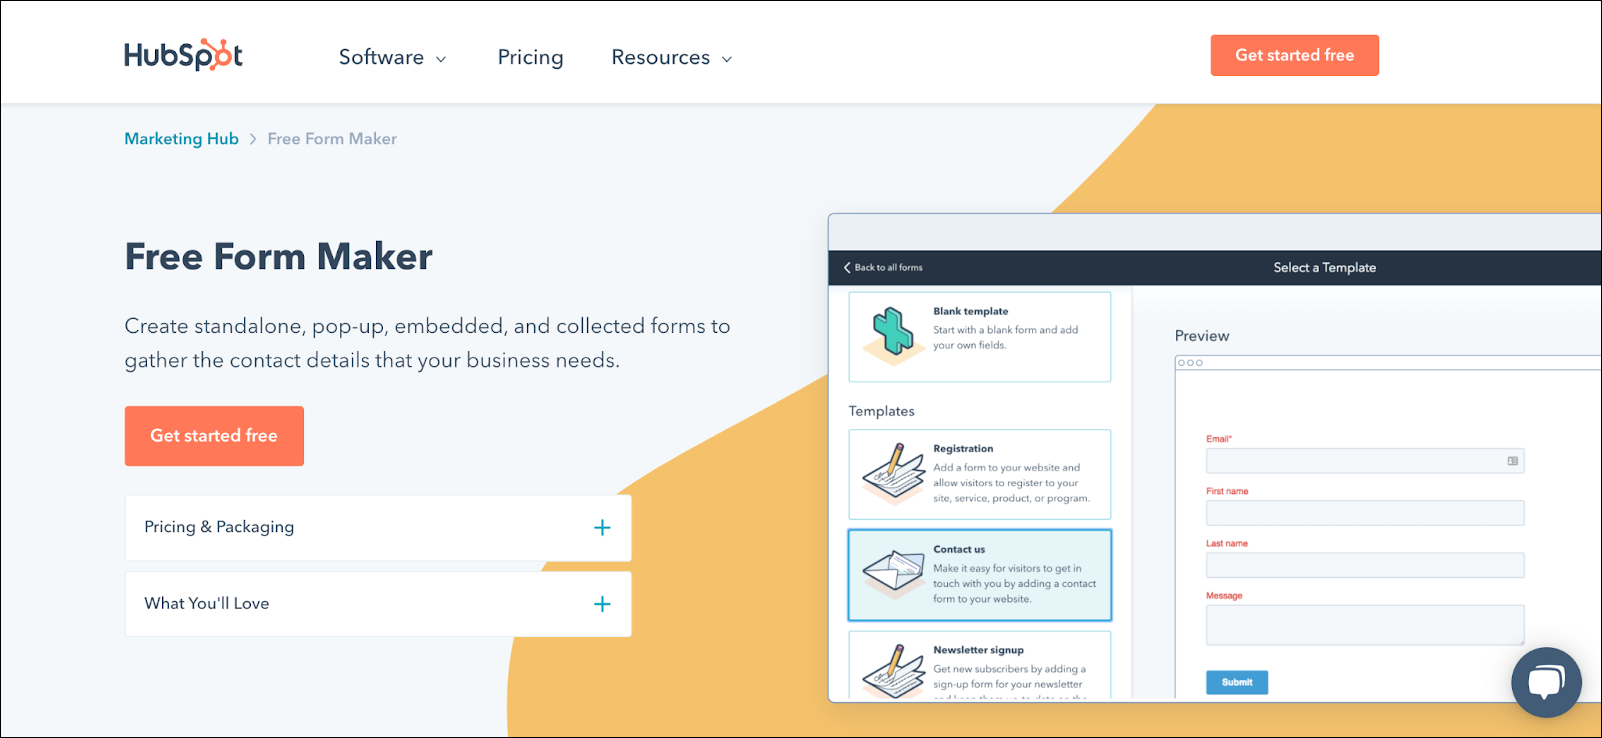 HubSpot’s Free Form Maker can help you build your email list.